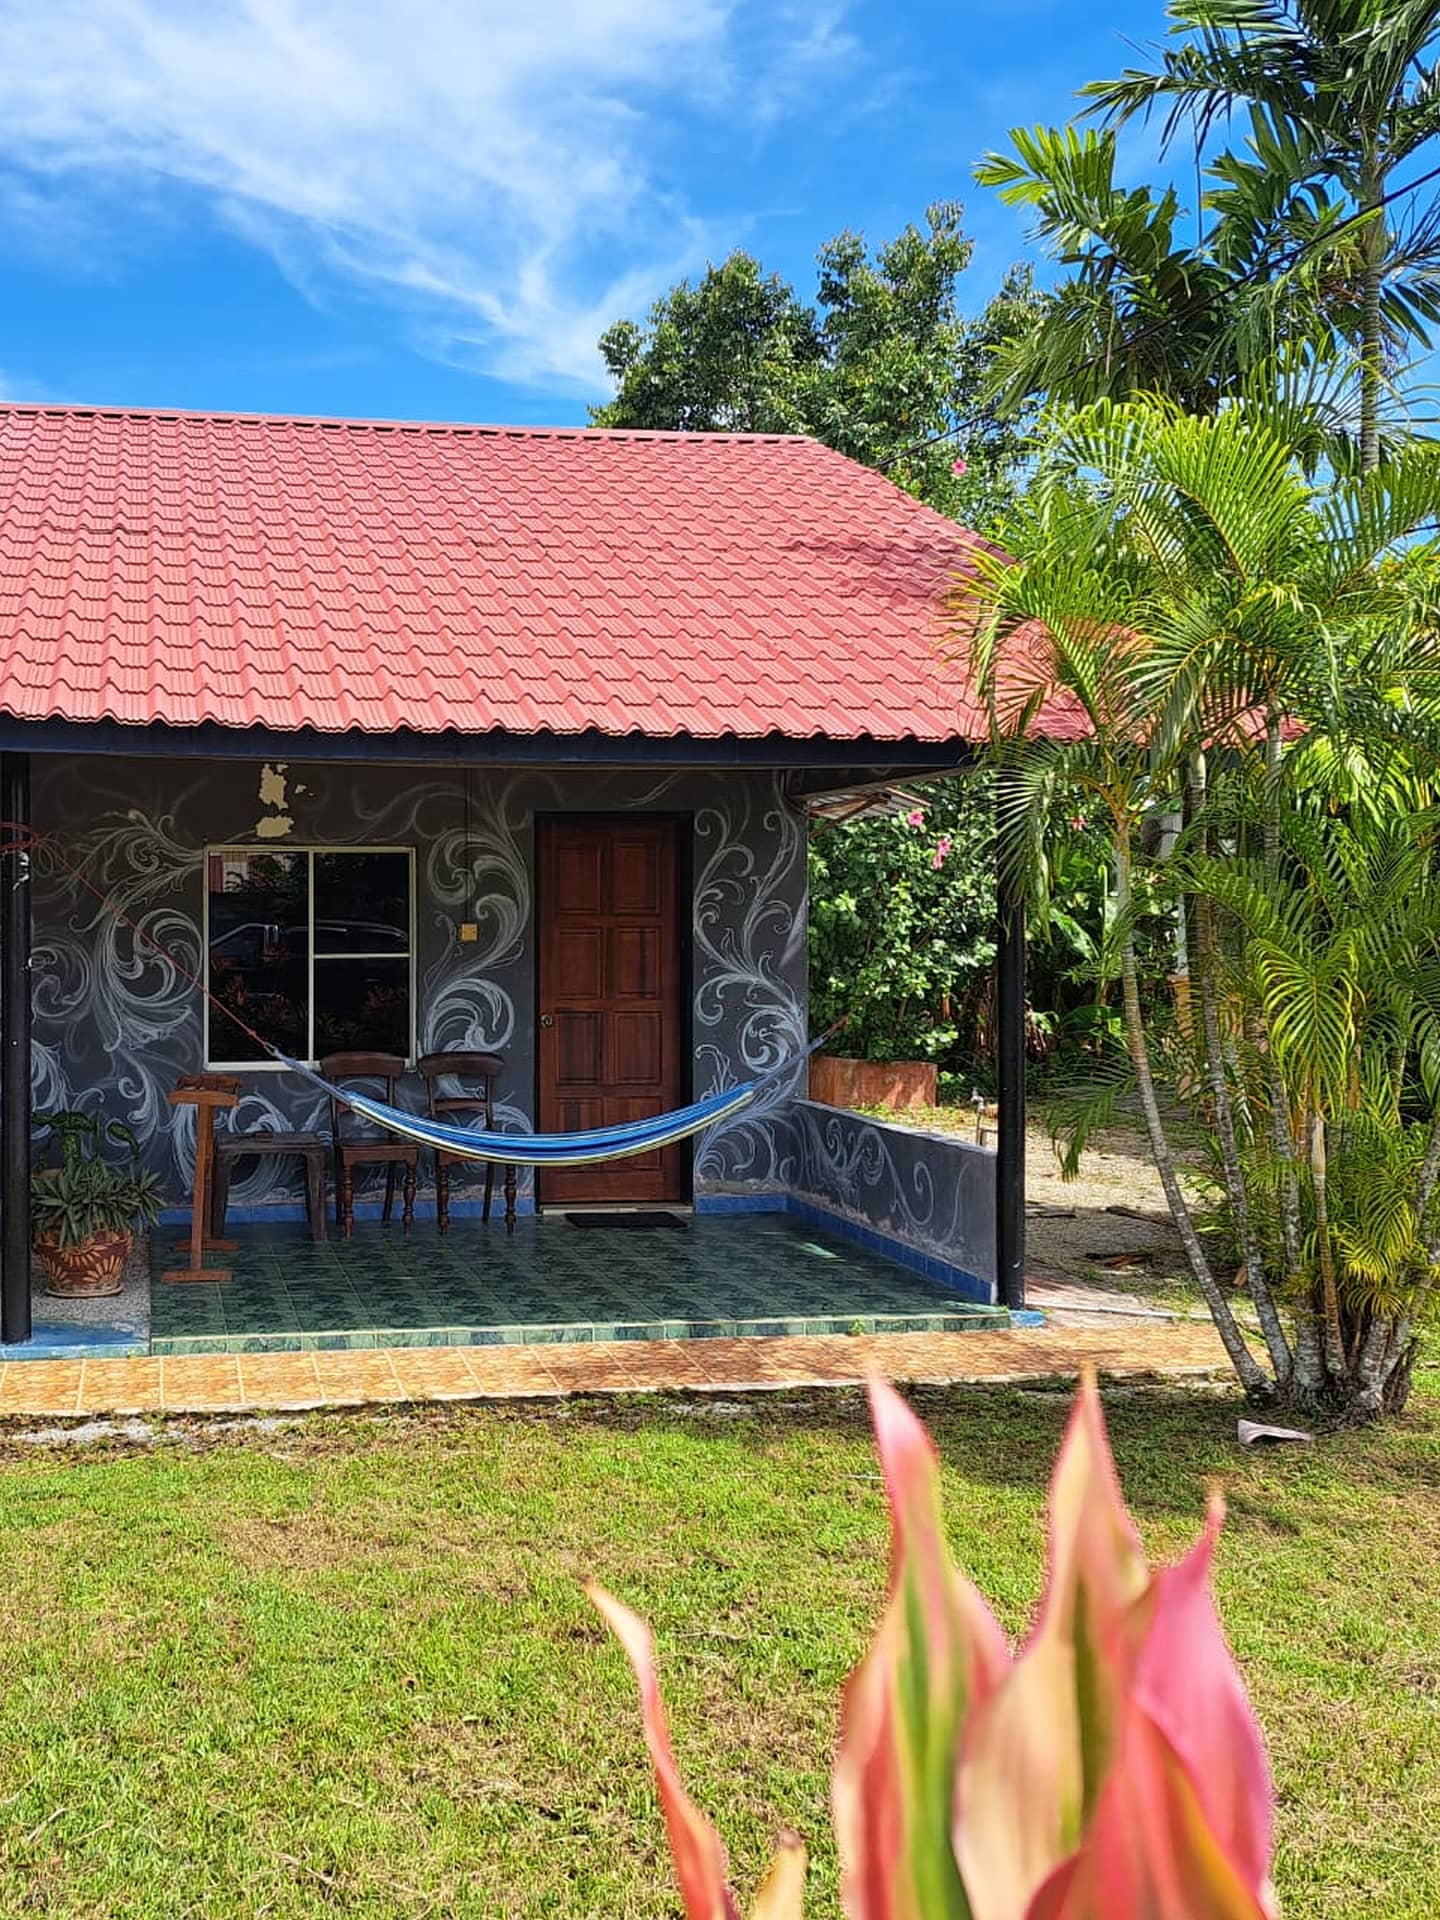 Rainbow Lodge Review – A Great budget accommodation in Langkawi